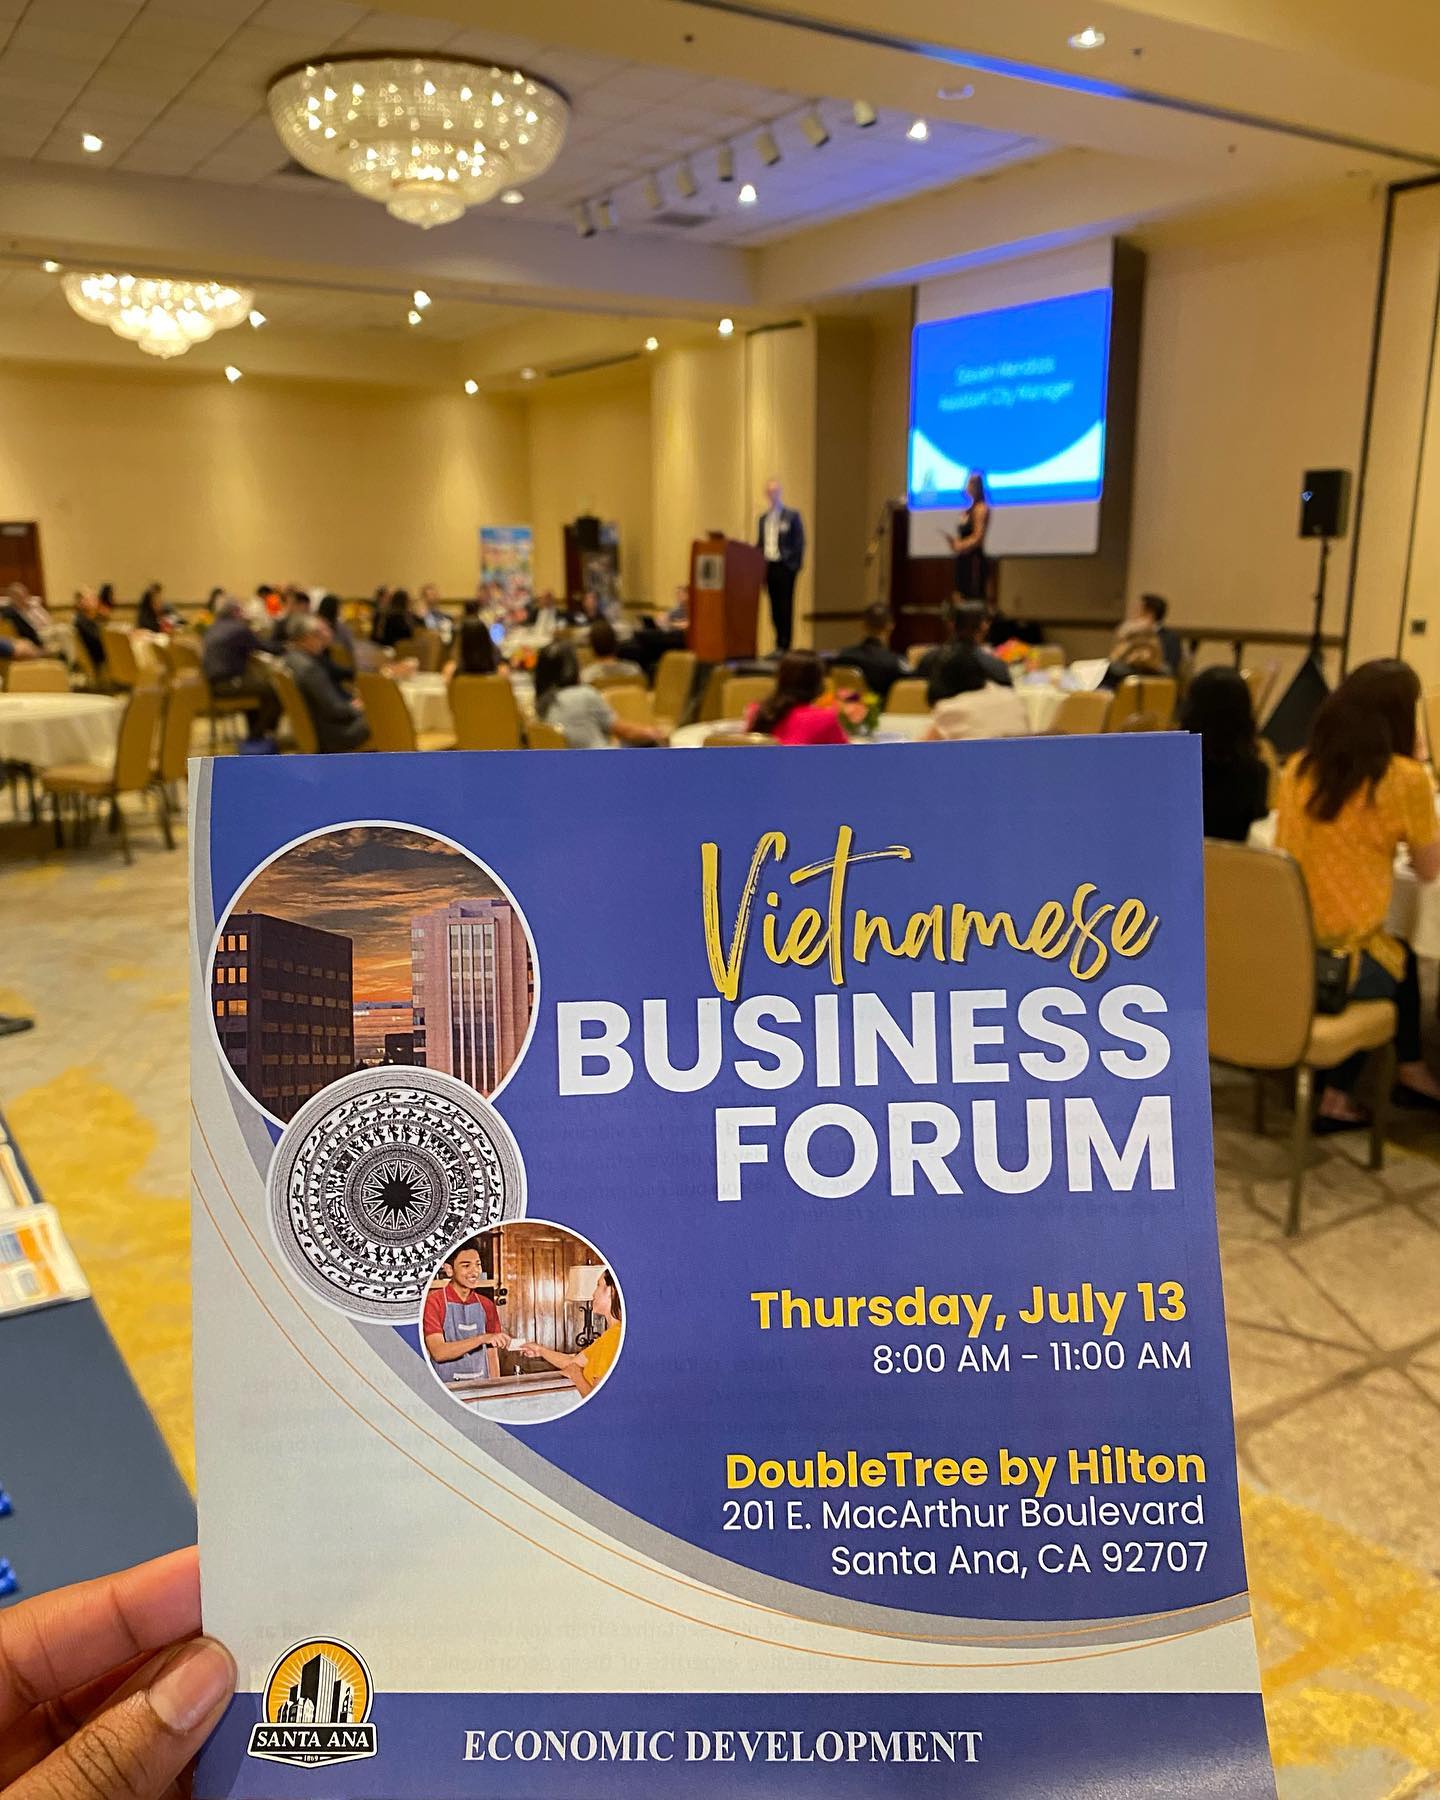 A flyer for the Vietnamese Business Forum is held in front of a crowd of people sitting at tables in a room watching a man speak on a stage in front of a screen.